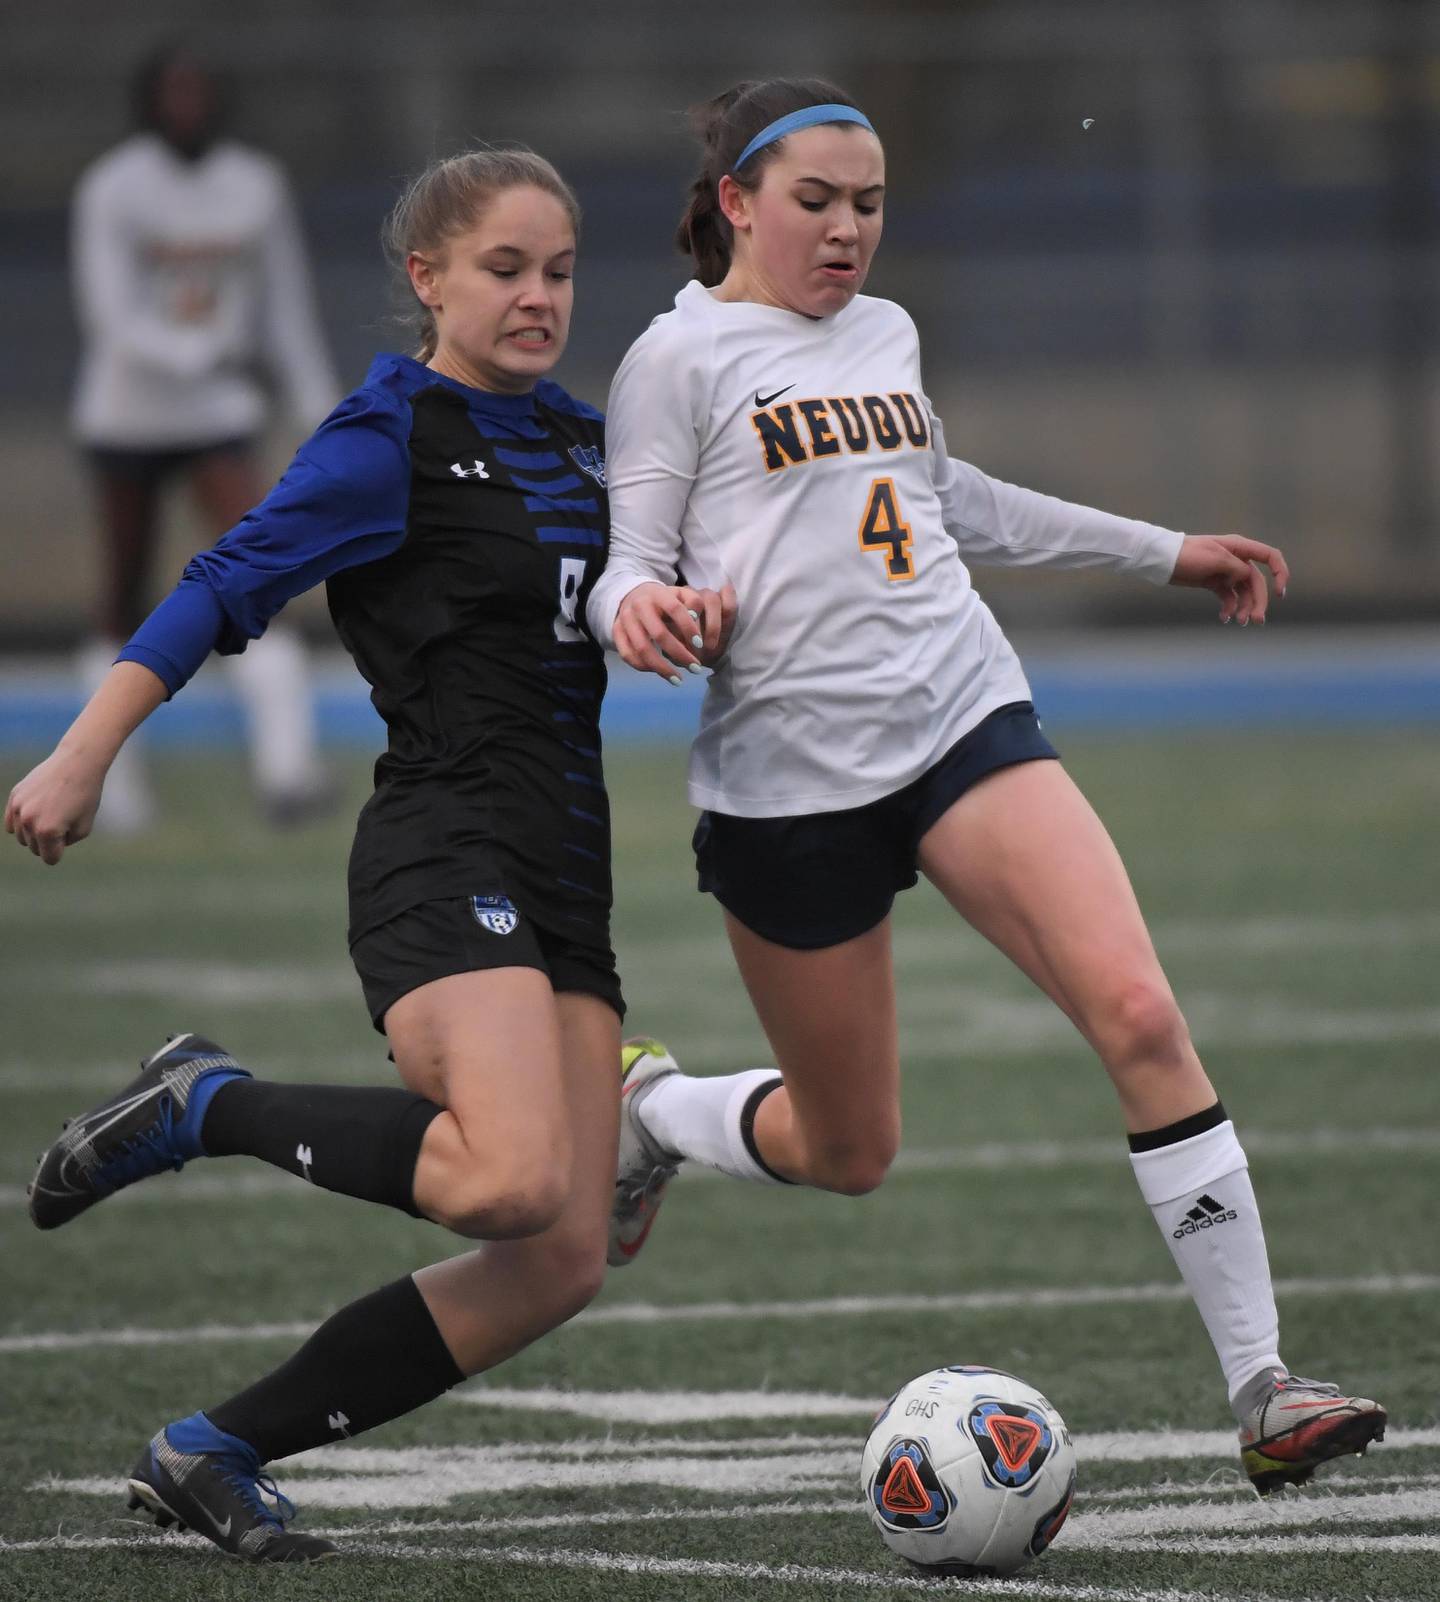 Geneva’s Olivia Hagen battles with Neuqua Valley’s Allessandra Russo who loses a fingernail, upper right, in the competition in a girls soccer game in Geneva on Thursday, March 23, 2023.